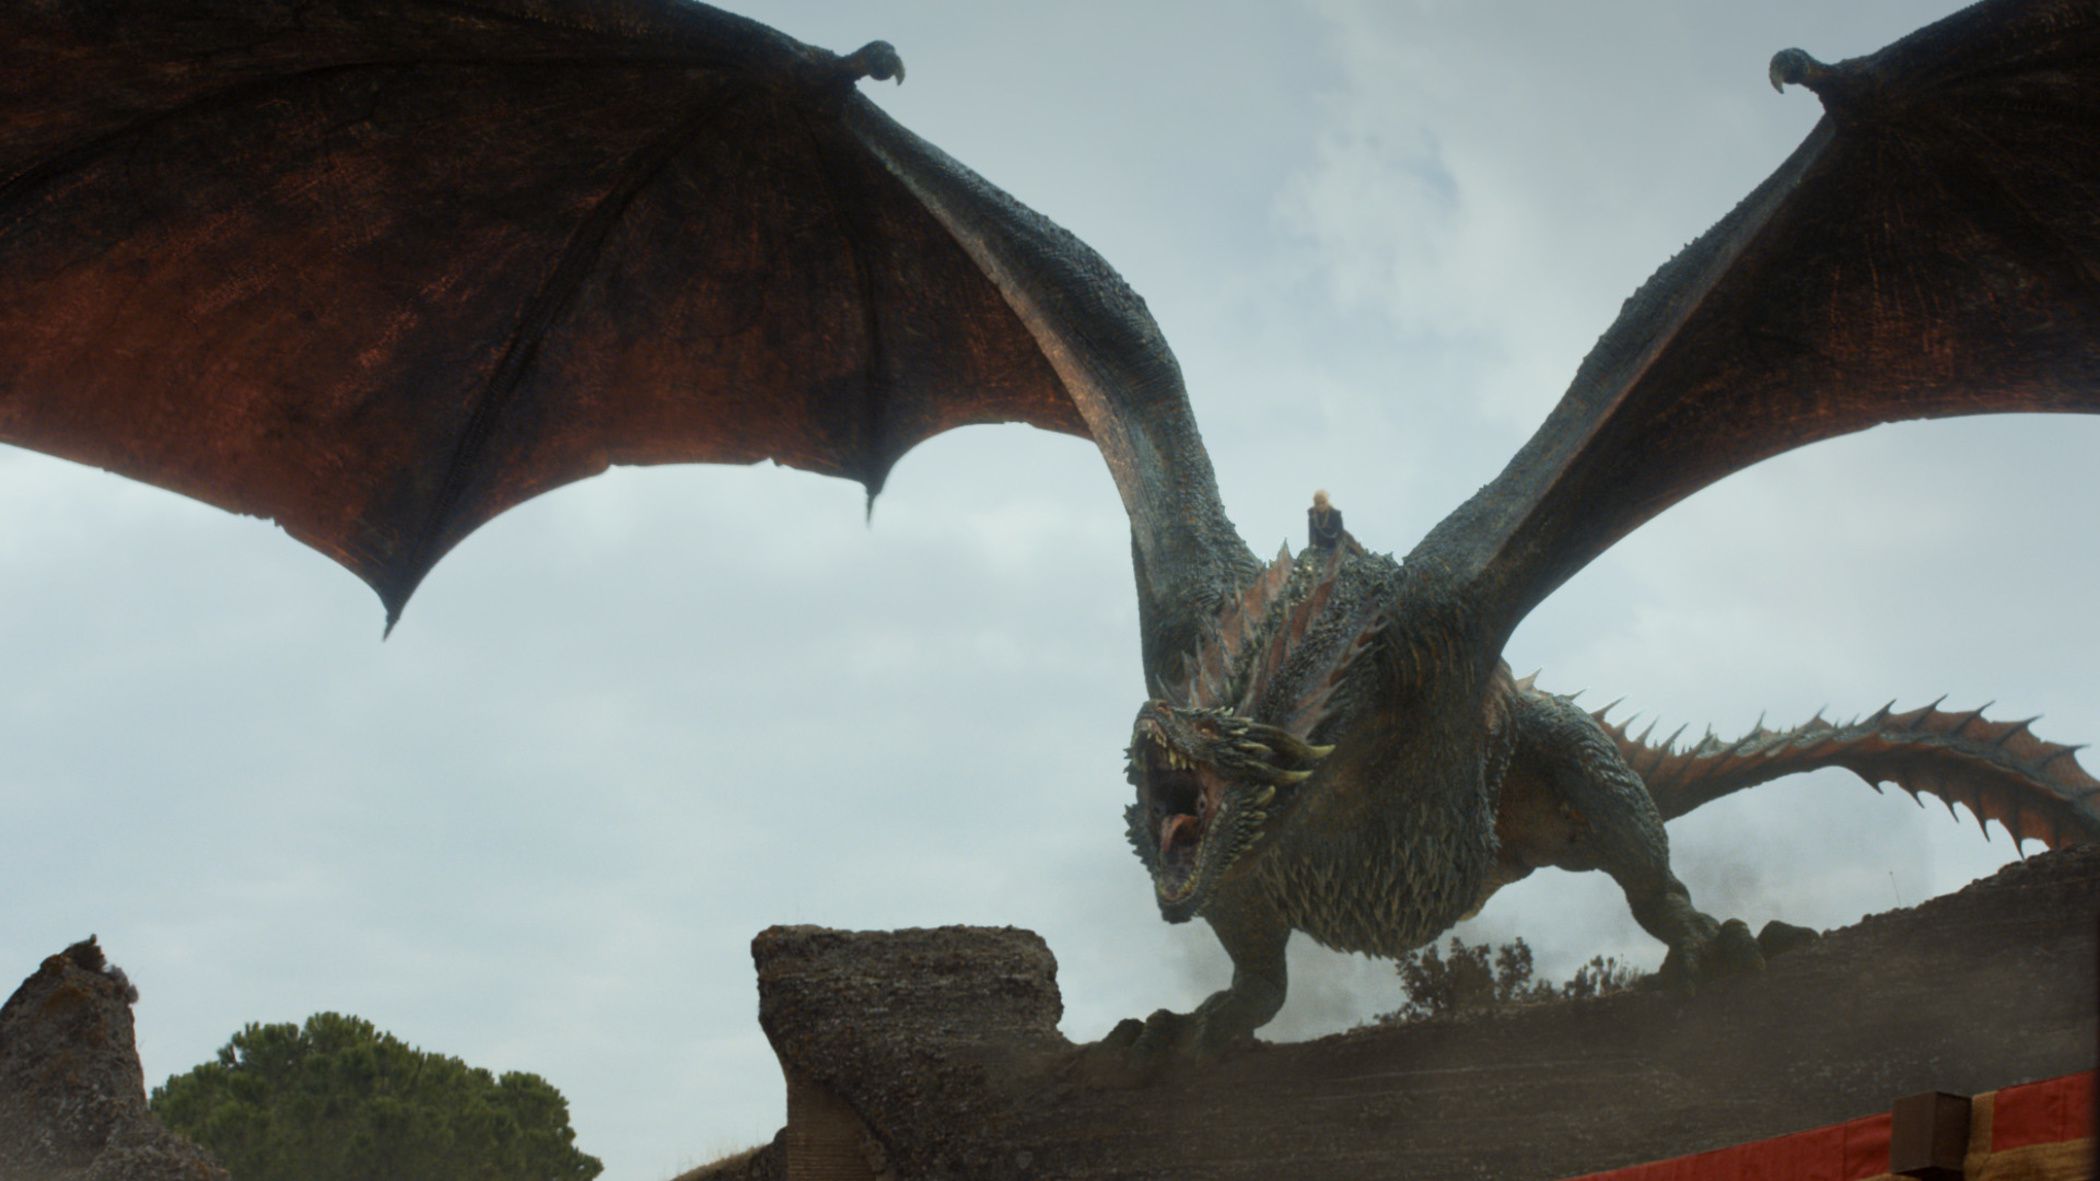 Everything We Know About Game of Thrones Prequel Series House of the Dragon